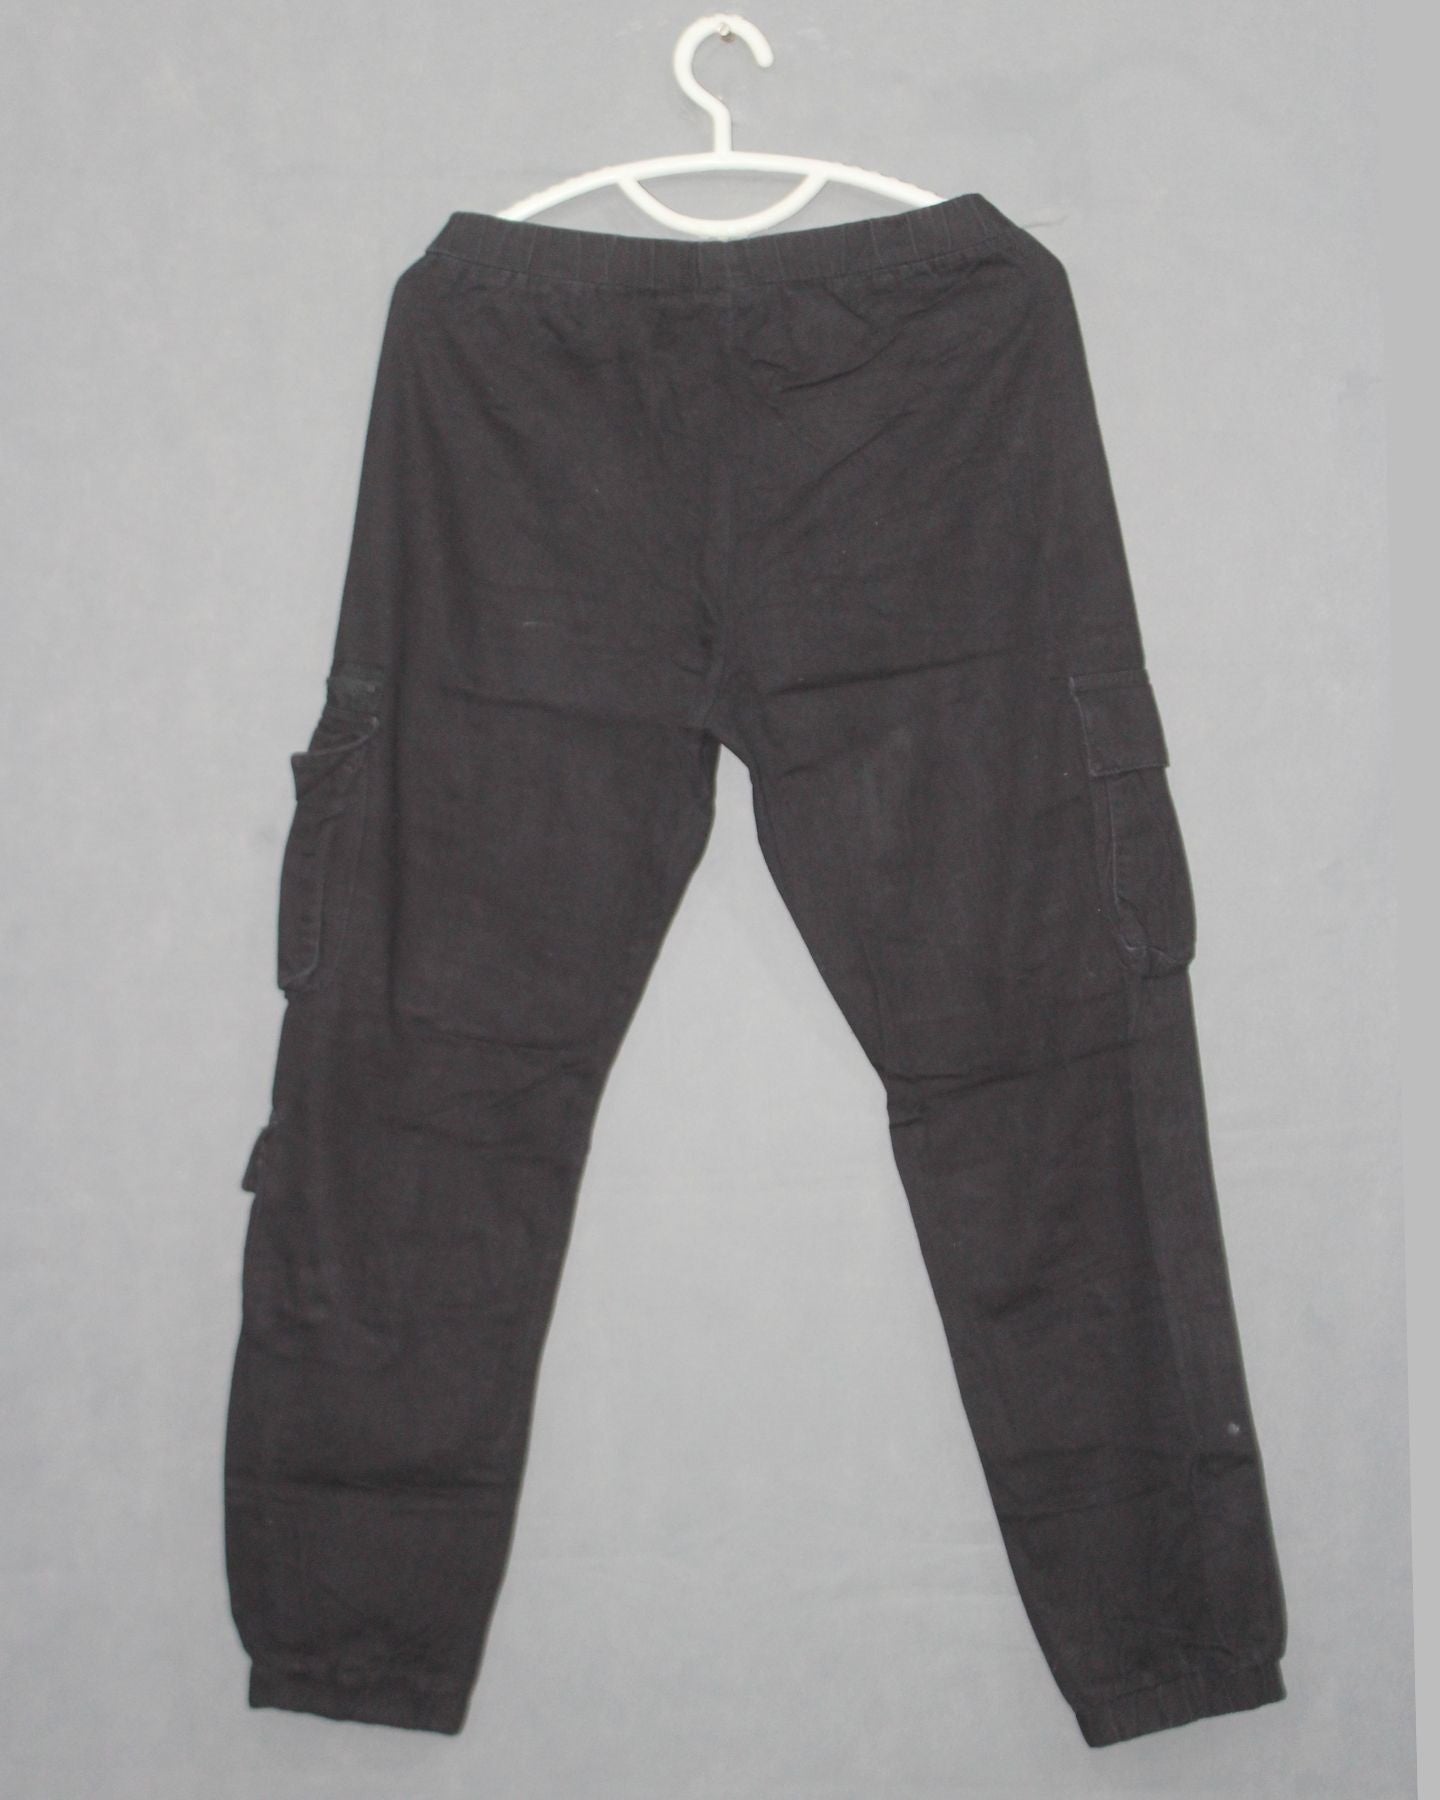 New Look Branded Original Cotton Stretch For Men Cargo Pant